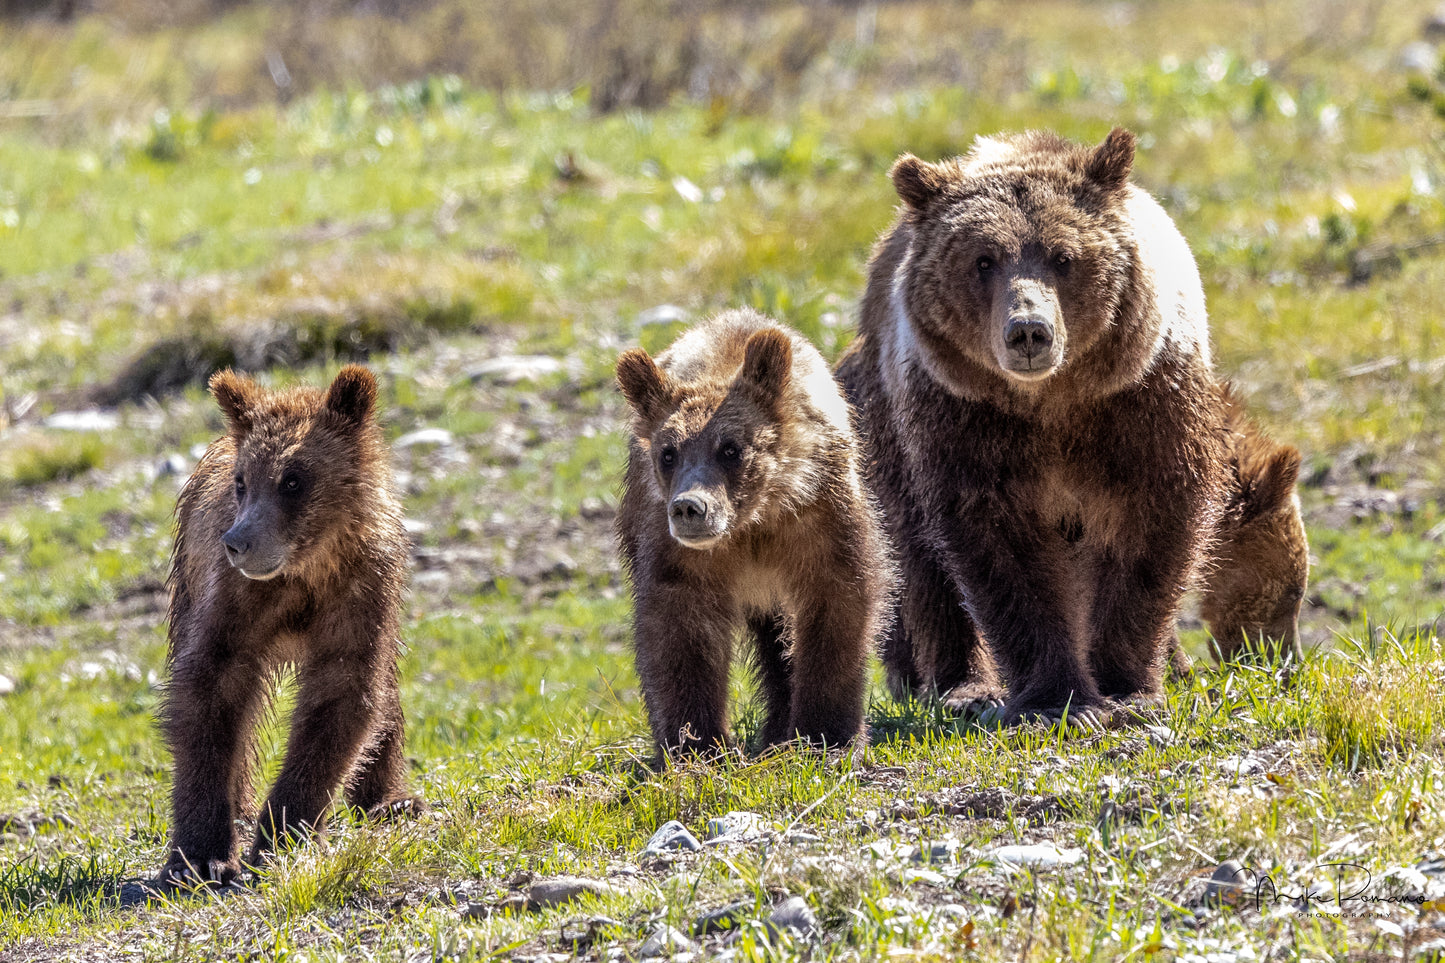 Bear 399 and her 4 Cubs, May 2021